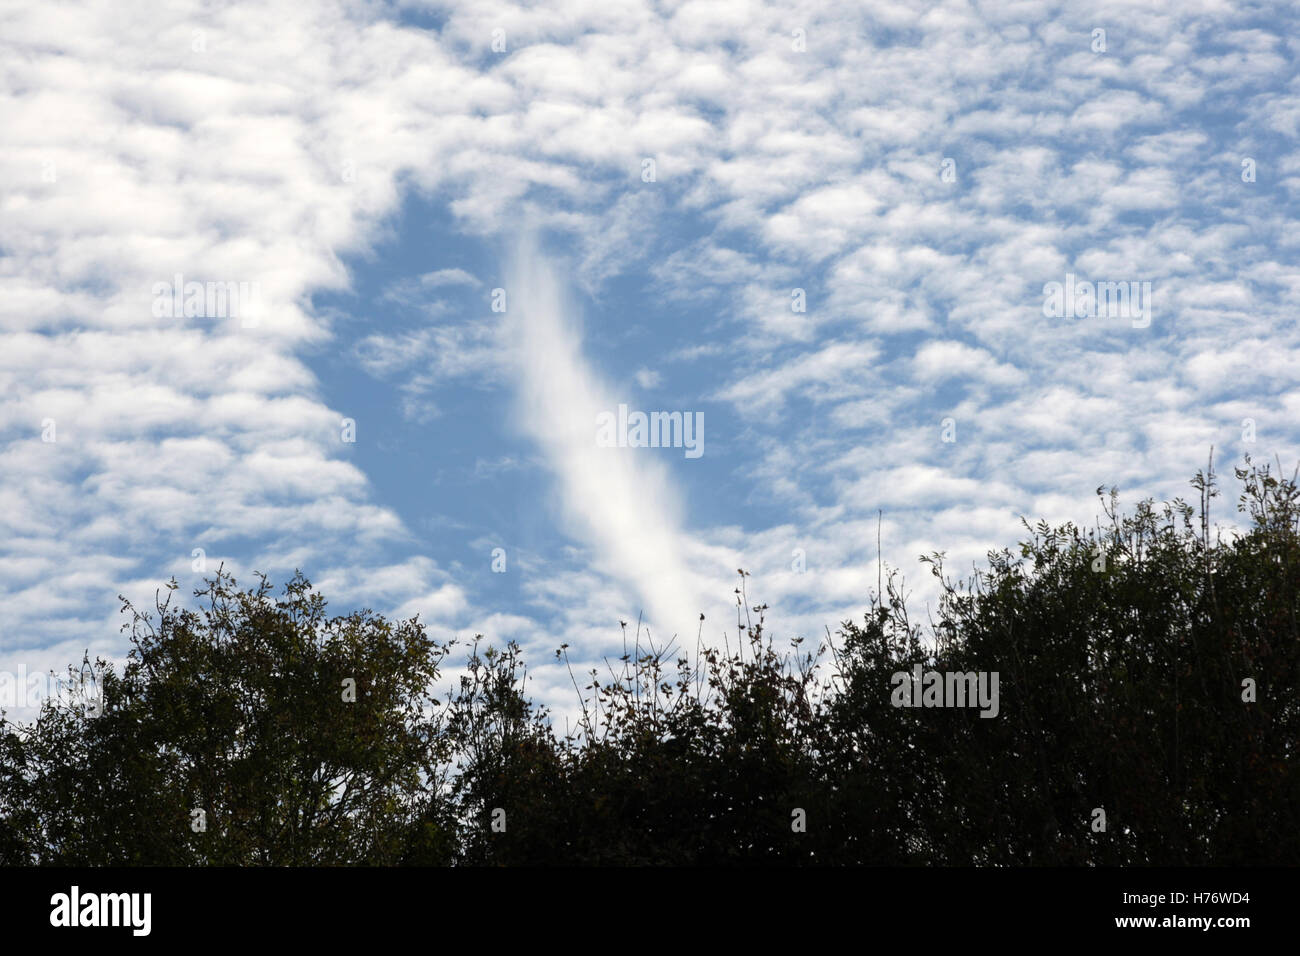 Hole Punch cloud, Worthing, West Sussex, England, October 2016. Stock Photo